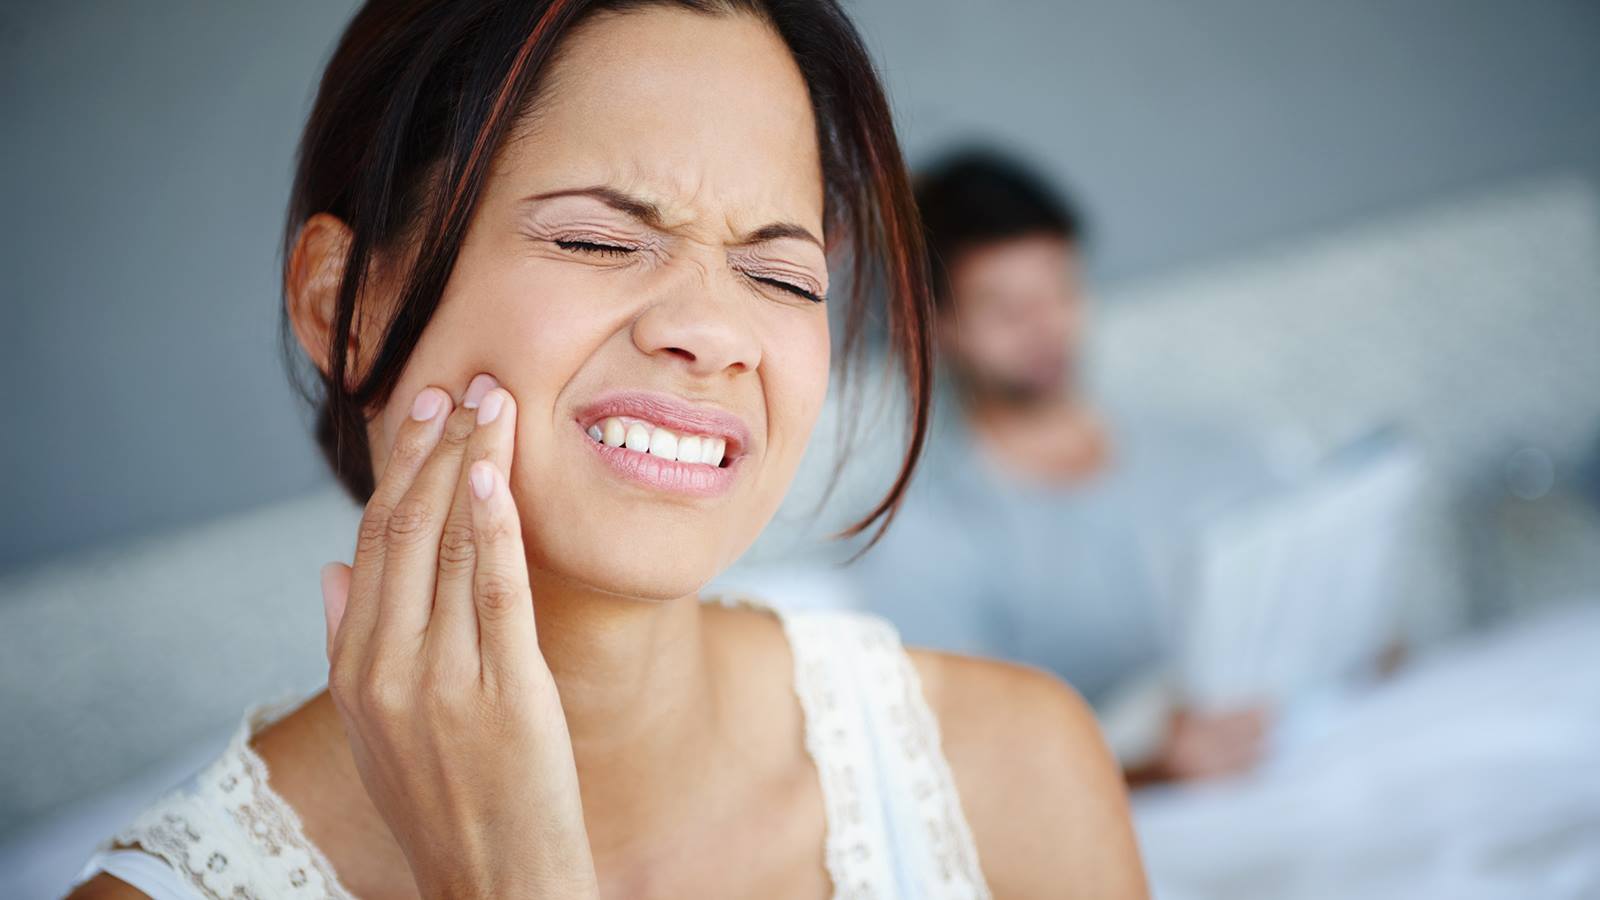 Tmj disorder- treat it with best oral and maxillofacial surgeon in Indore.